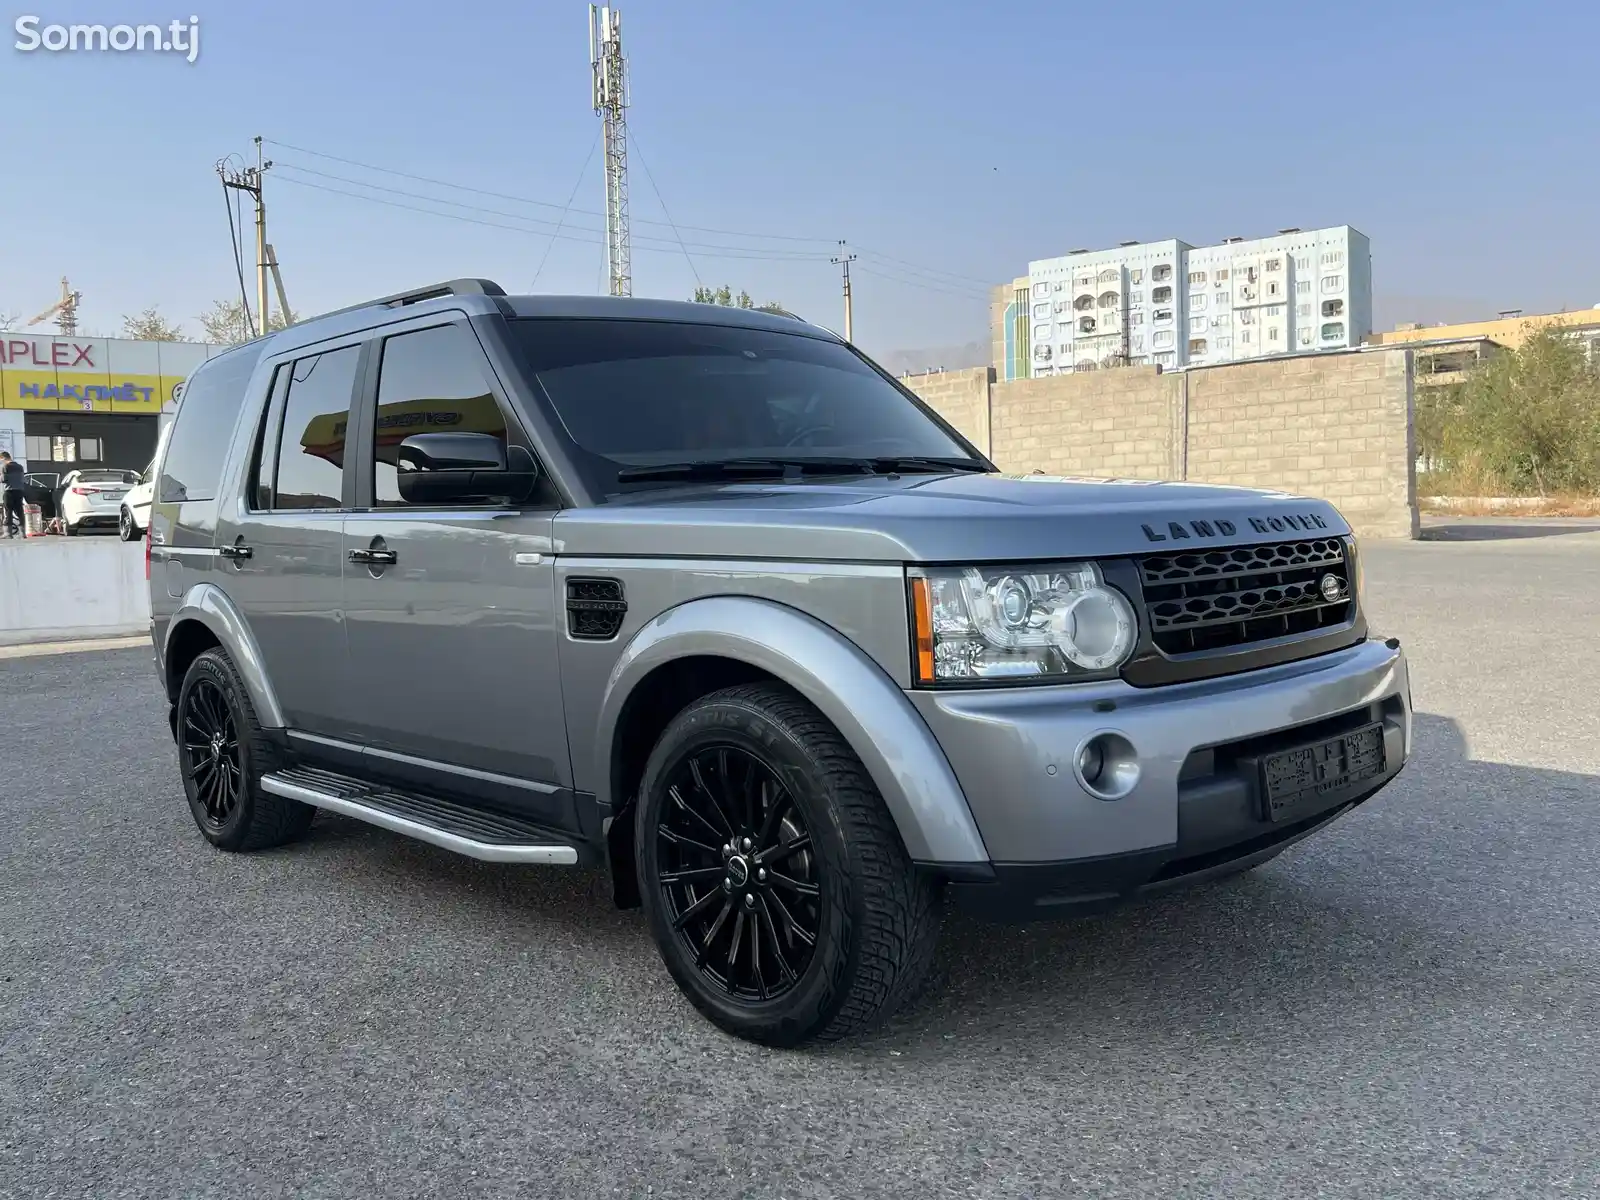 Land Rover Discovery, 2012-5